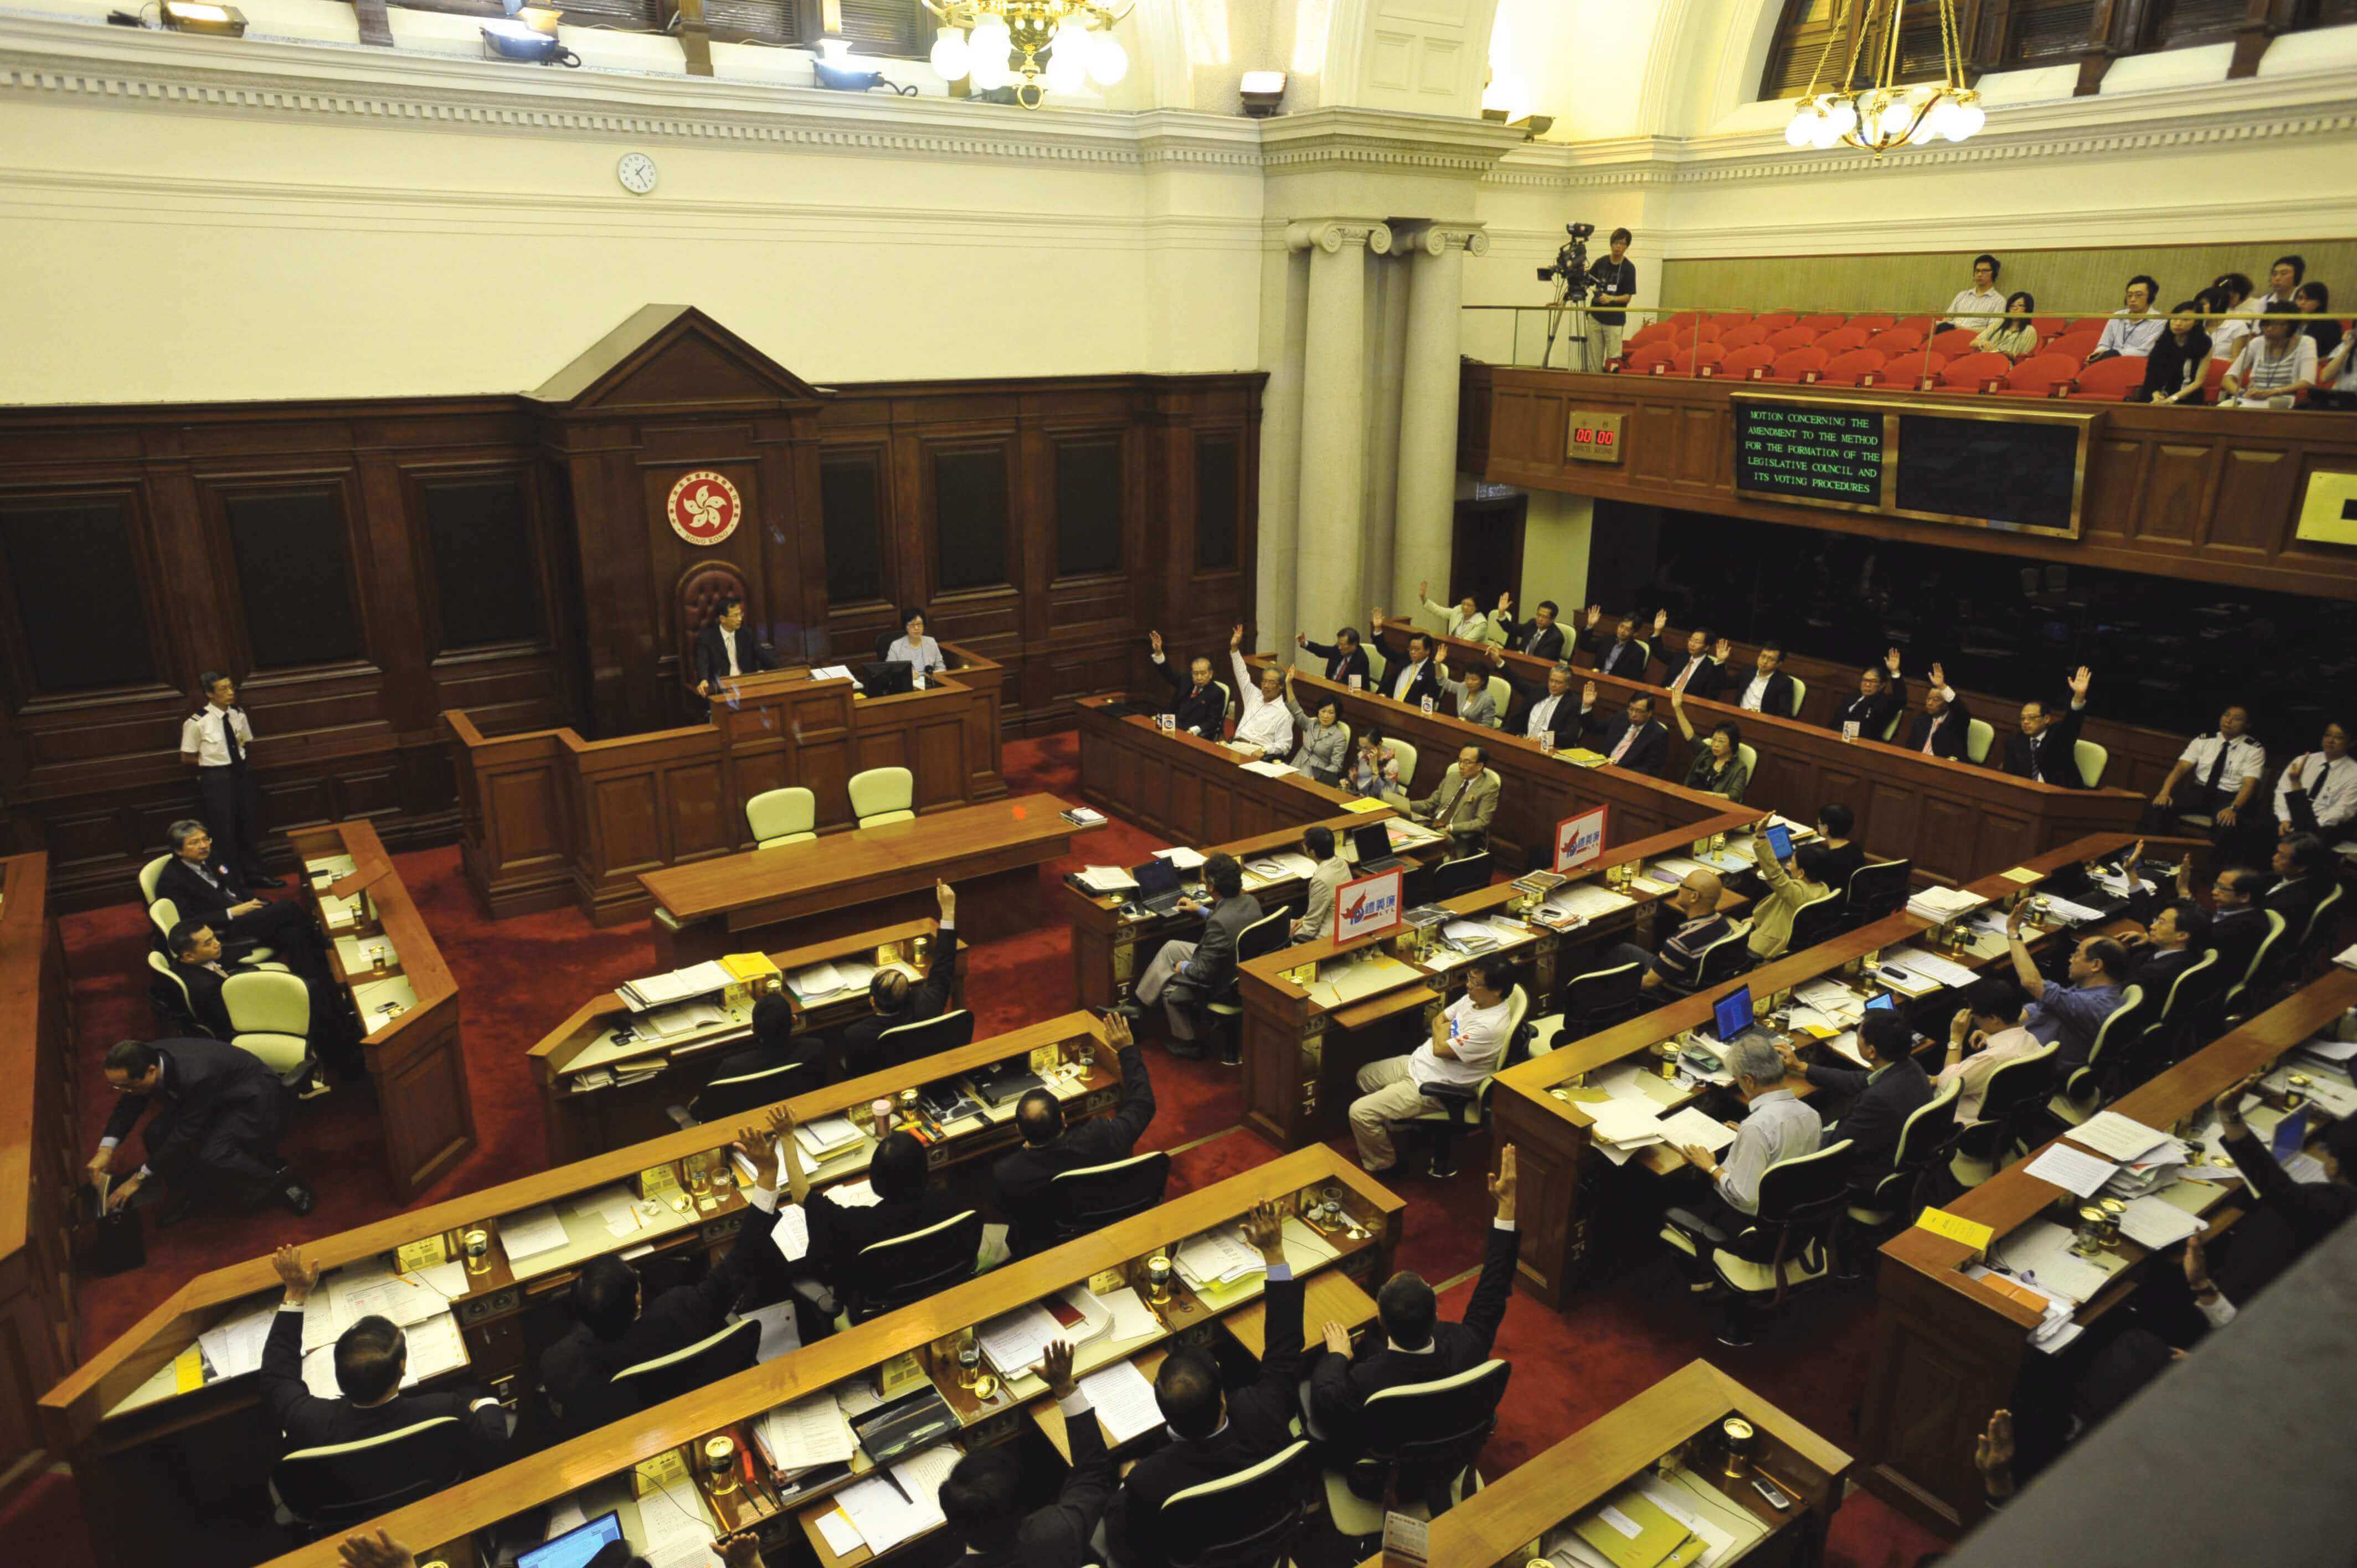 The motion concerning the amendment to the method for the formation of LegCo was endorsed by LegCo in 2010